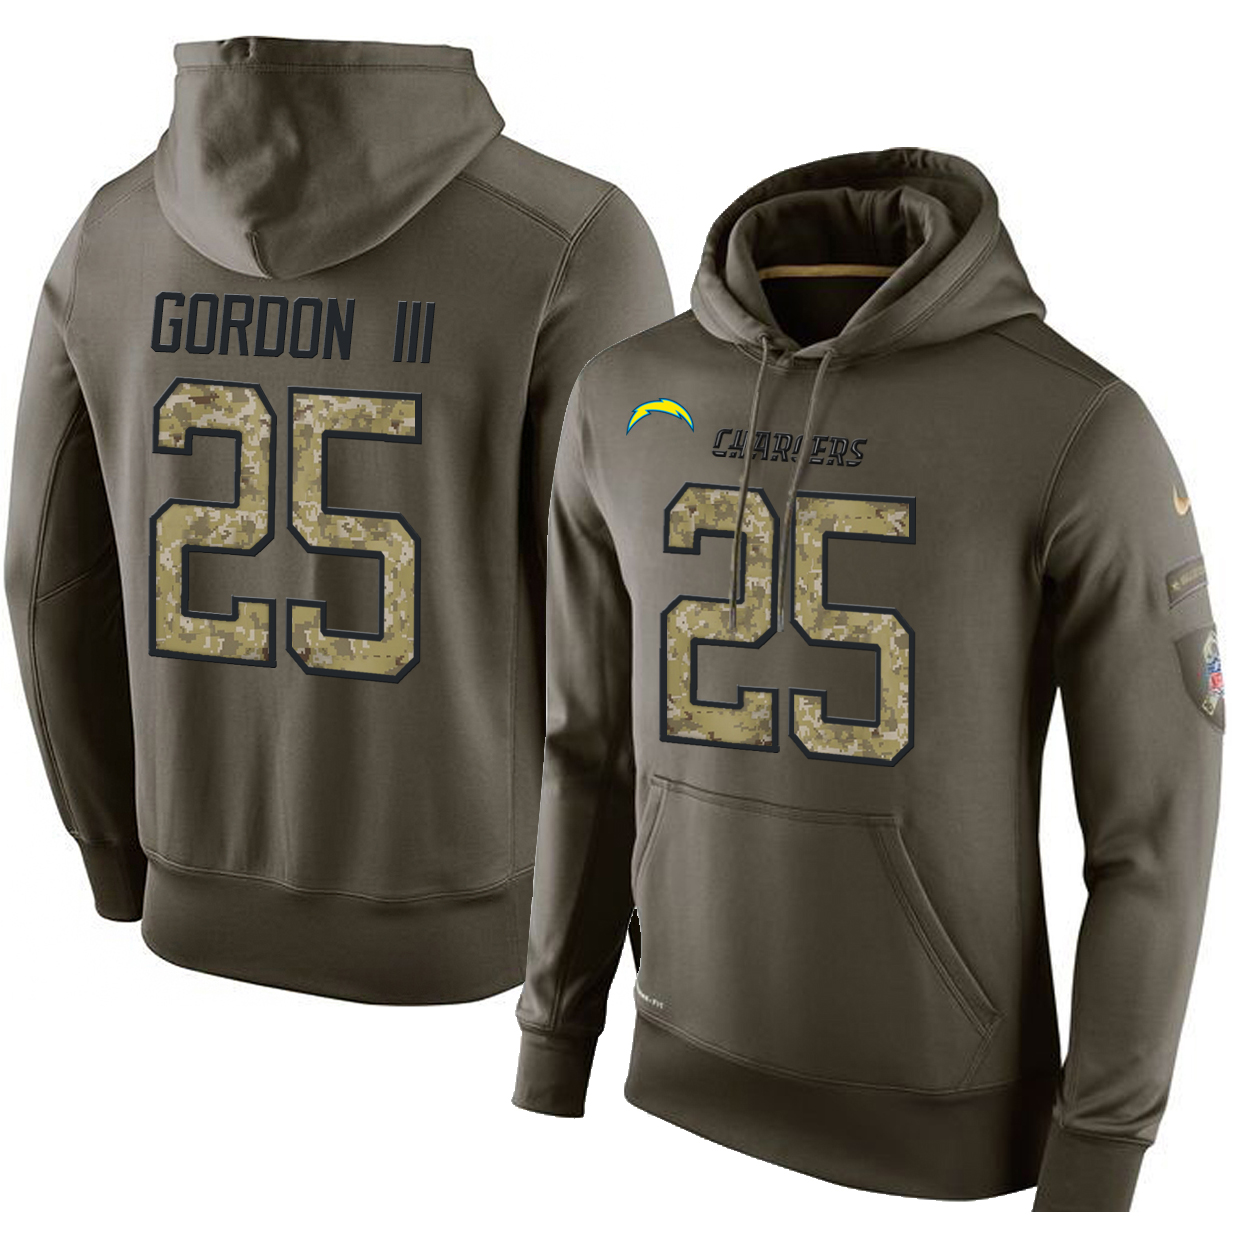 Football Men's Los Angeles Chargers #25 Melvin Gordon III Stitched Green Olive Salute To Service KO Performance Hoodie